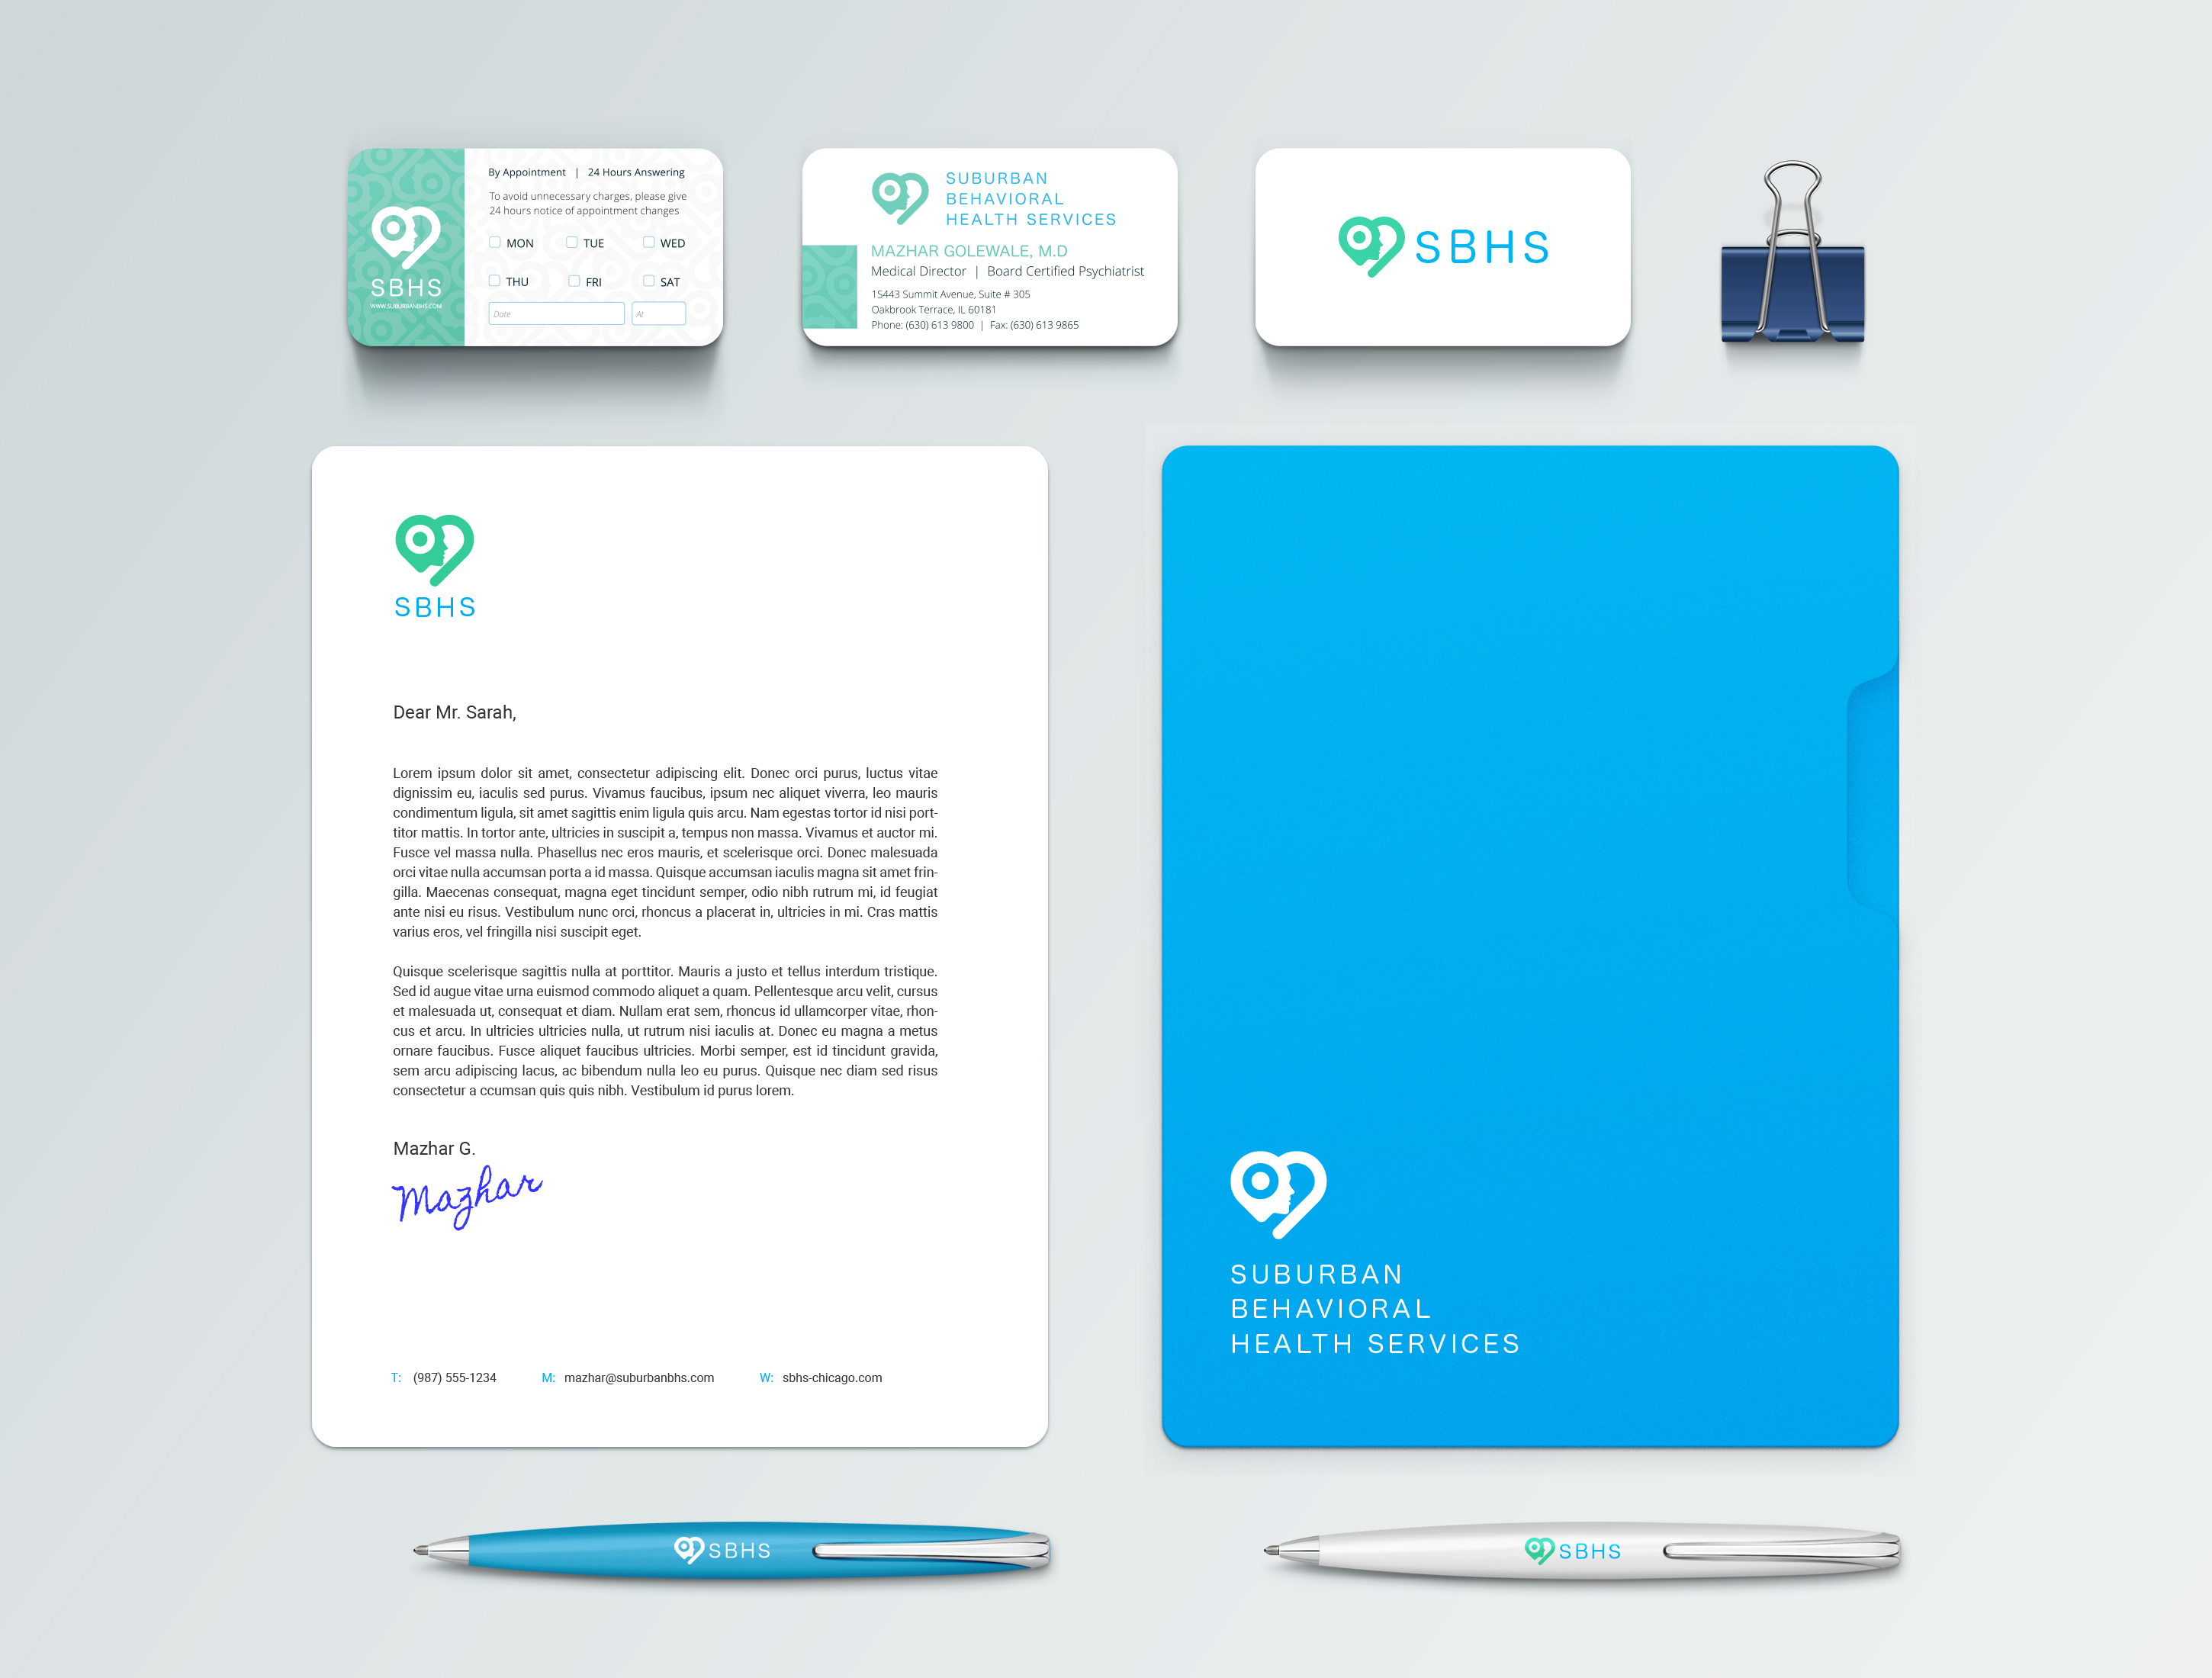 Our Work - SBHS-brand mockup | corporate identity design services | REDSHIFT